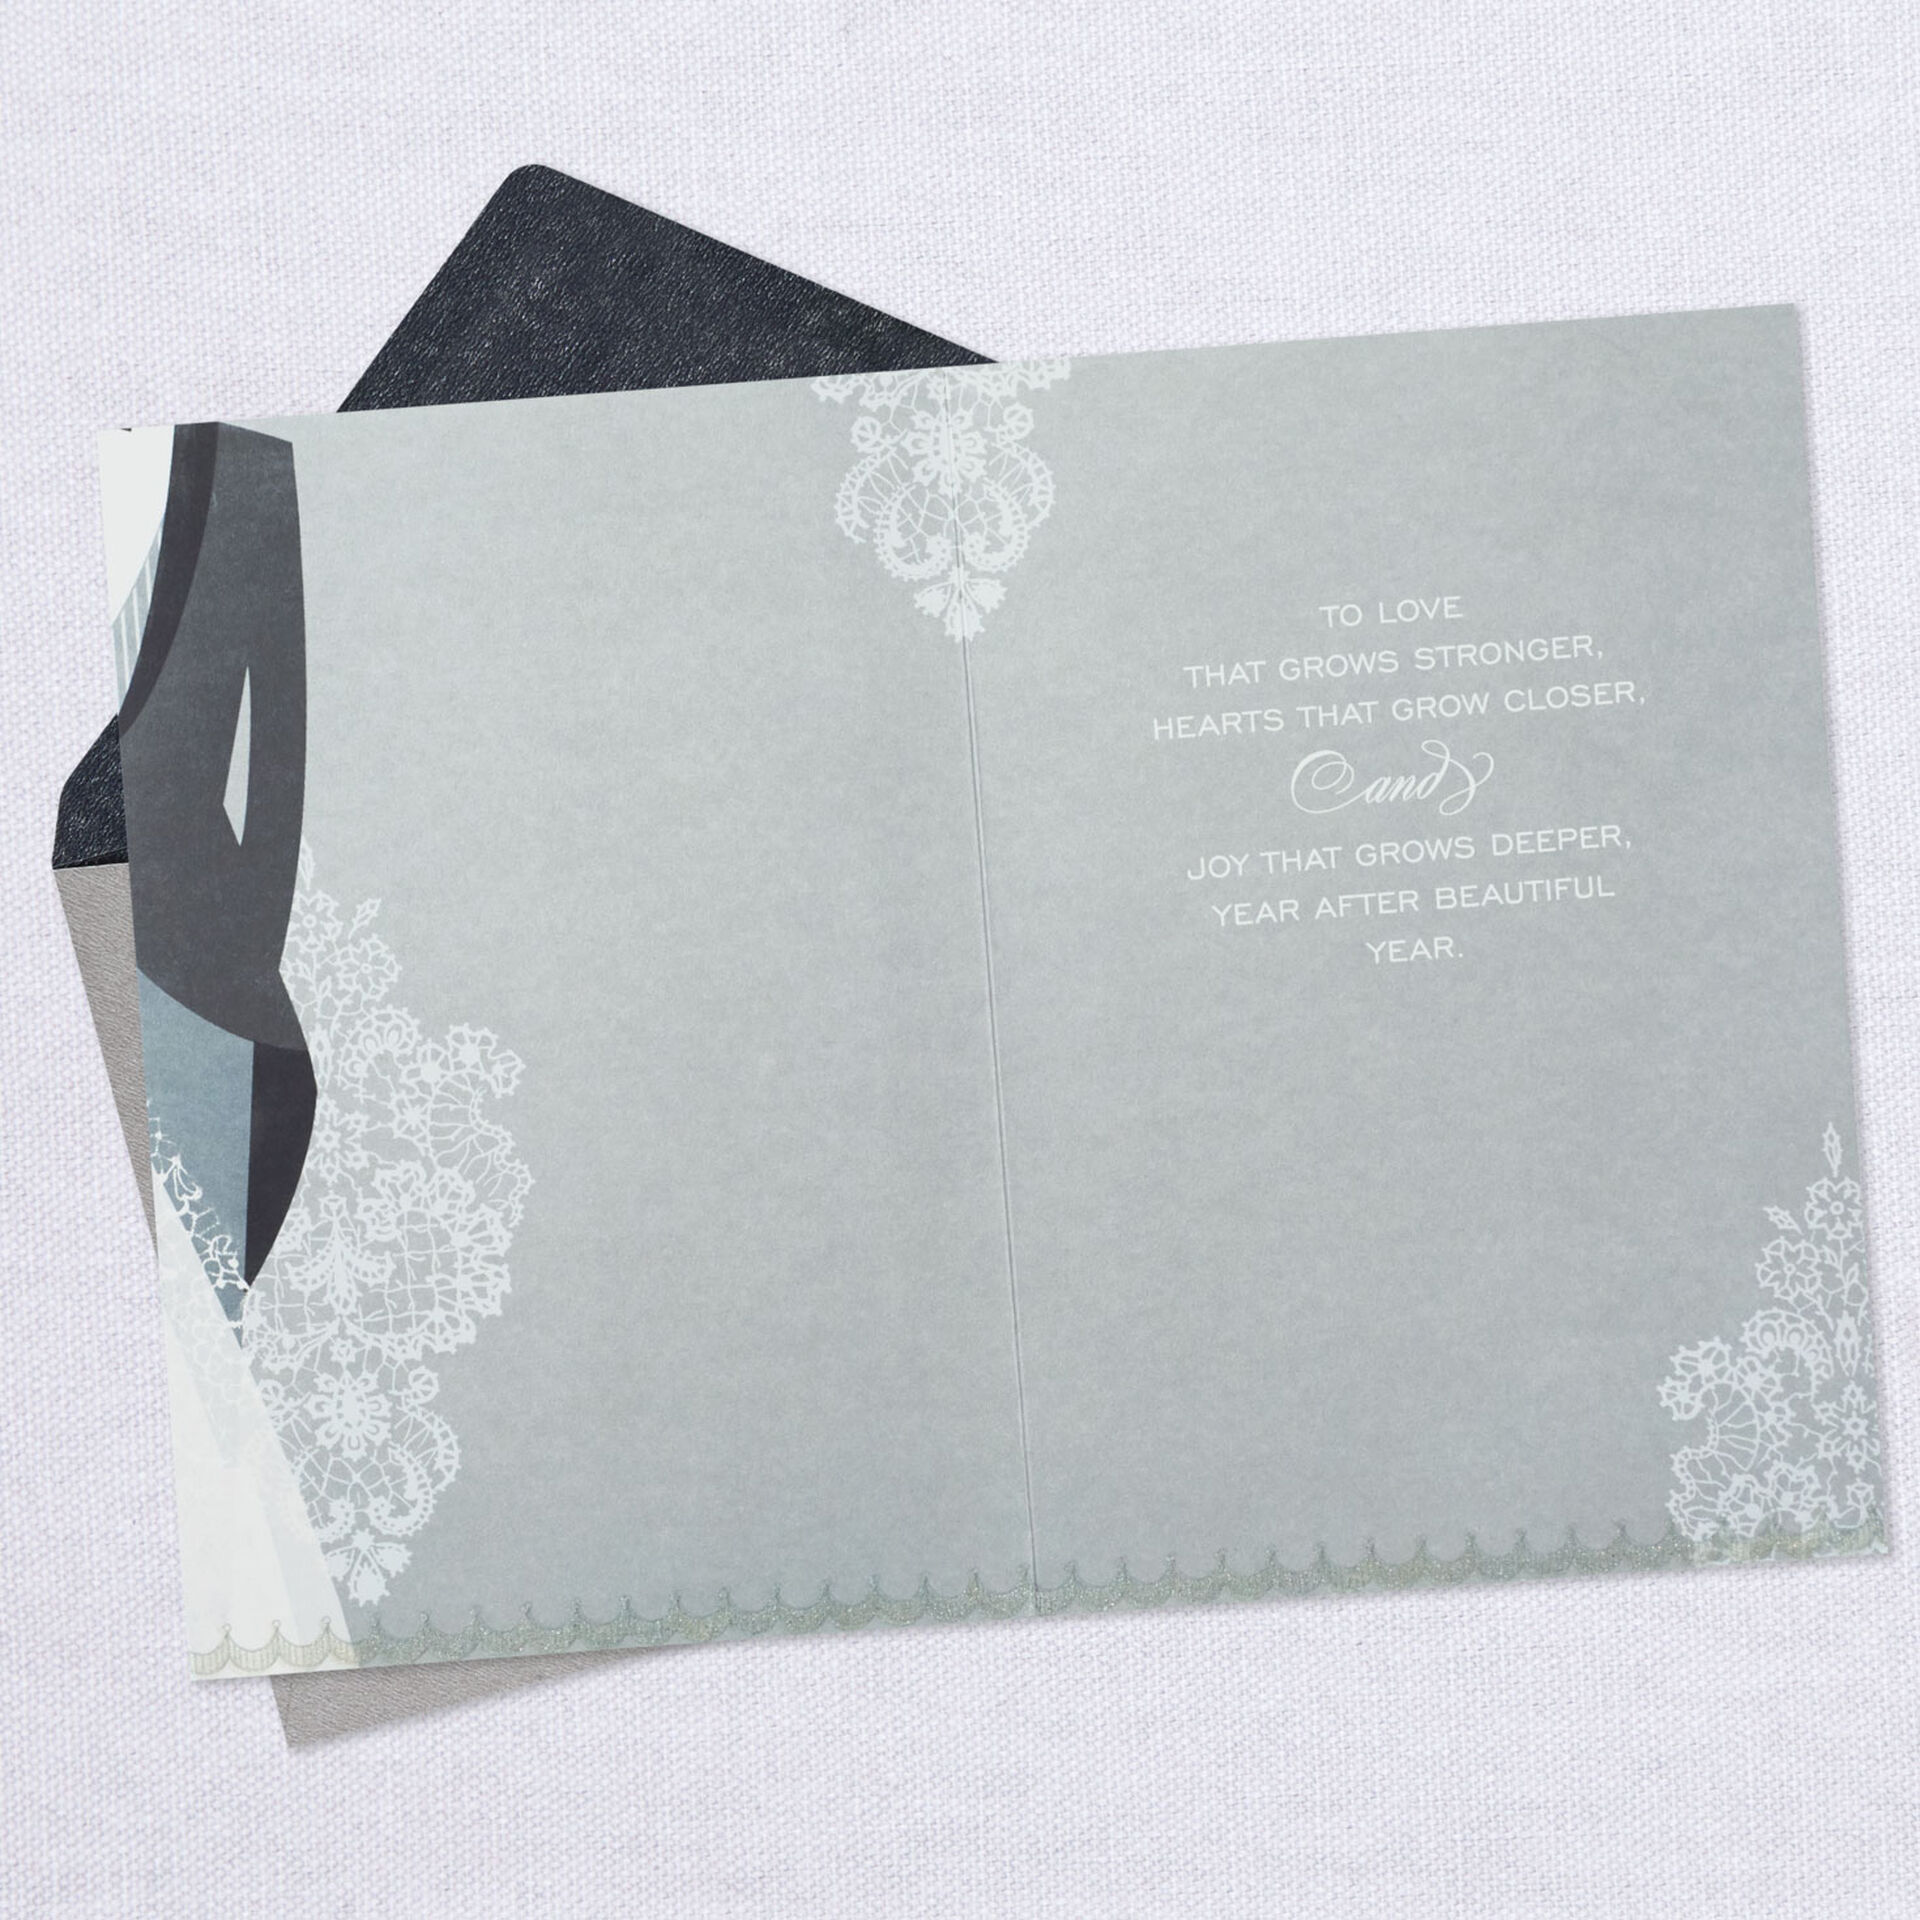 Happiness-Ahead-Daughter-and-SoninLaw-Wedding-Card_399W3767_03